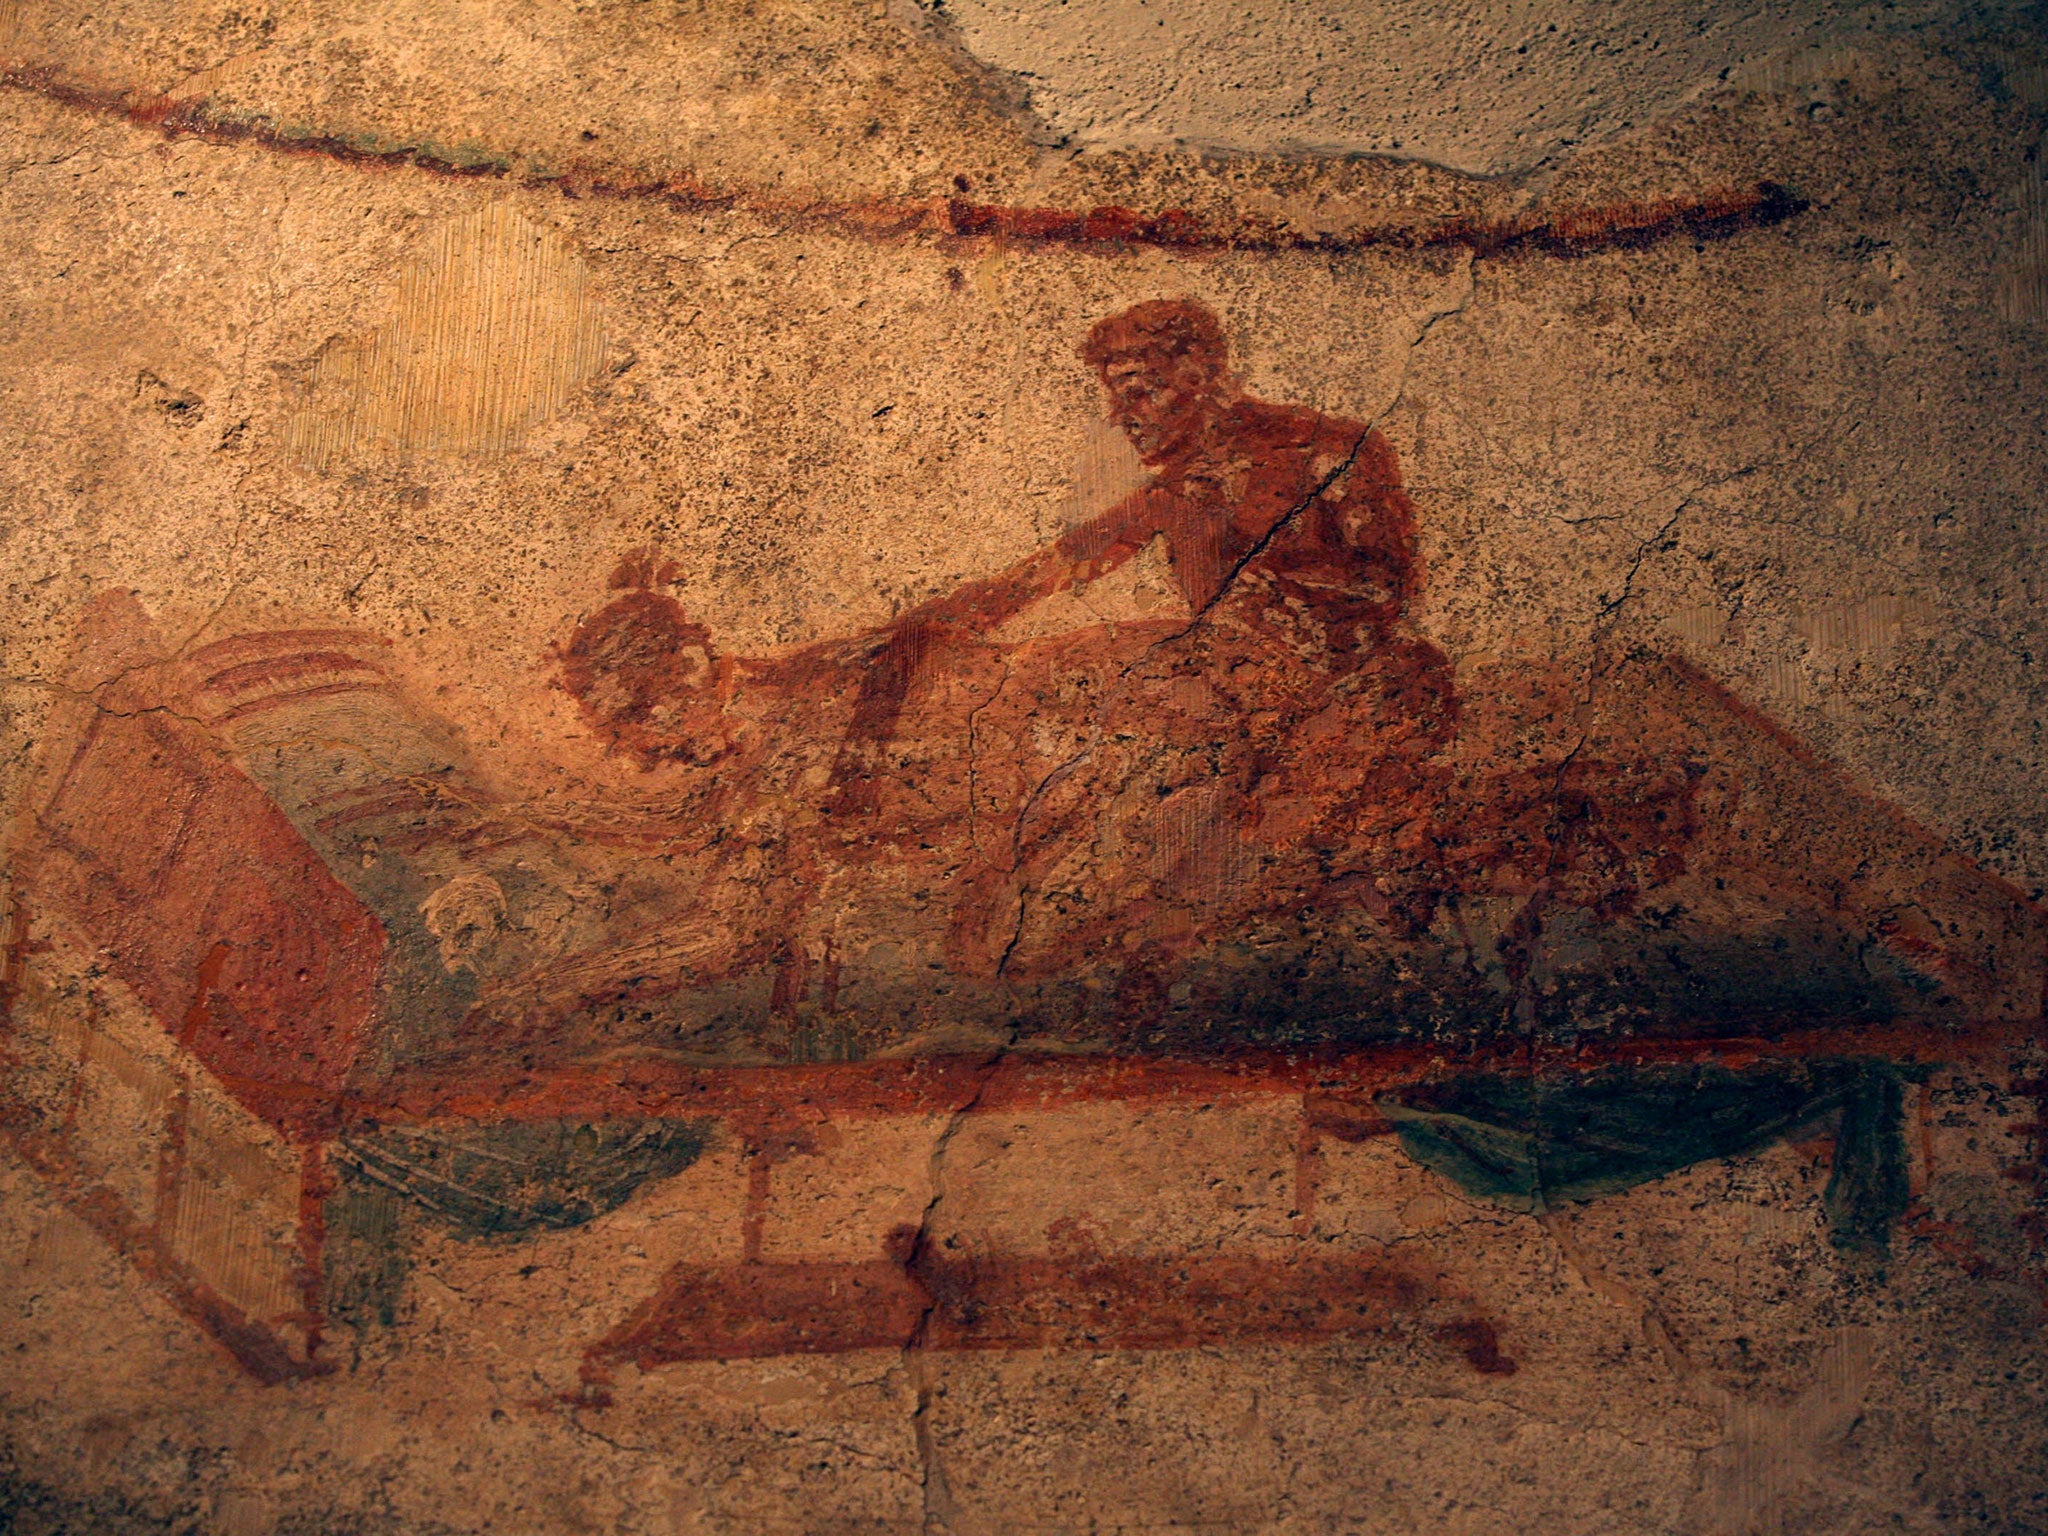 Close encounters: an erotic fresco from the Lupanar, a municipal brothel uncovered at Pompeii